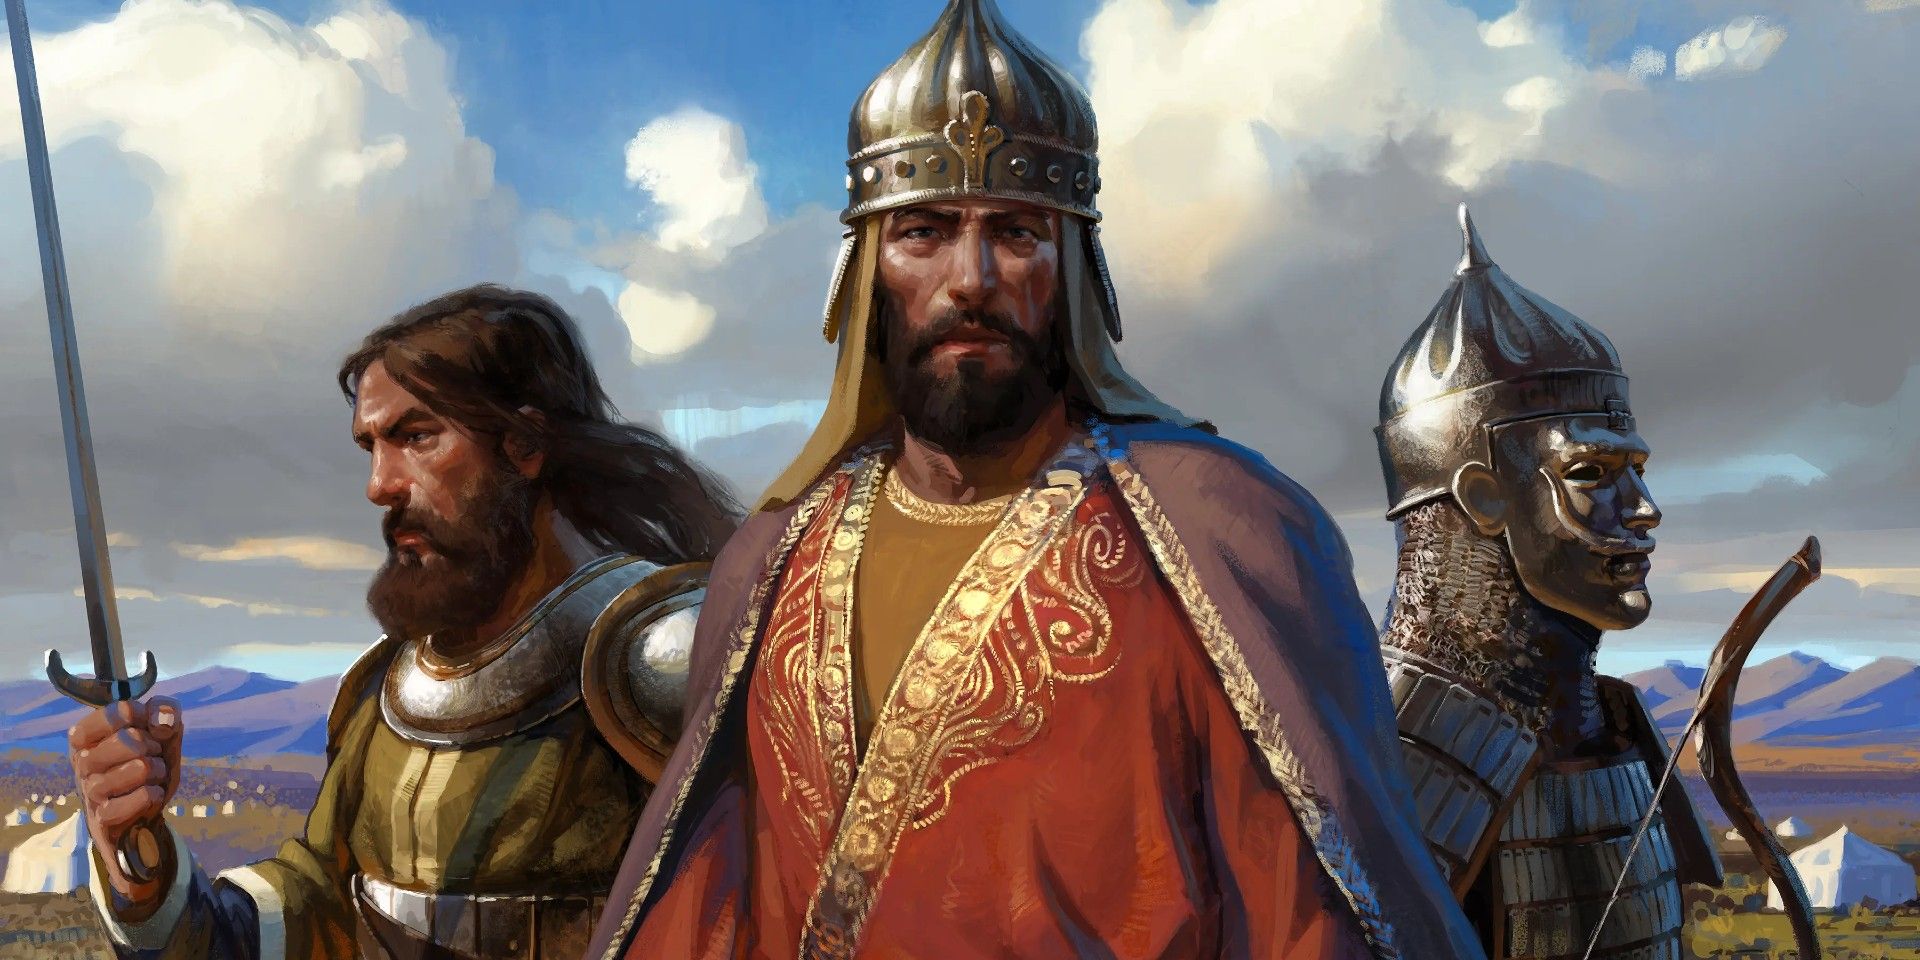 Fan-Favorite Age Of Empires Spinoff Returns In Definitive Edition